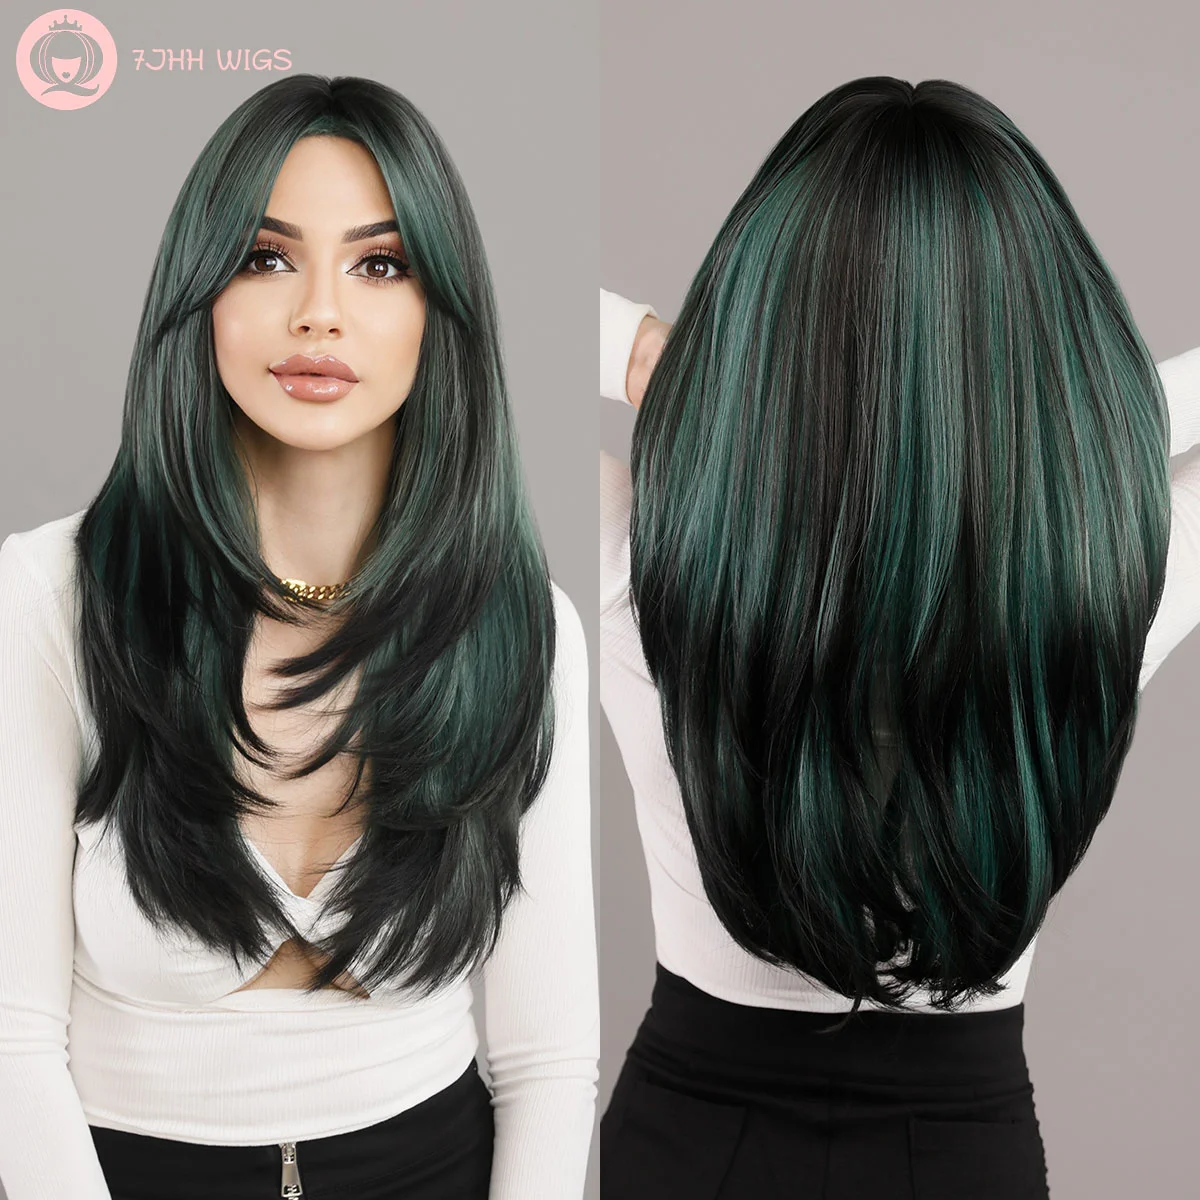 Long Straight Wigs with Curtain Bangs Green Highlight Layered Ombre Wig for Women Synthetic High Density Black Hair End Dye Wig